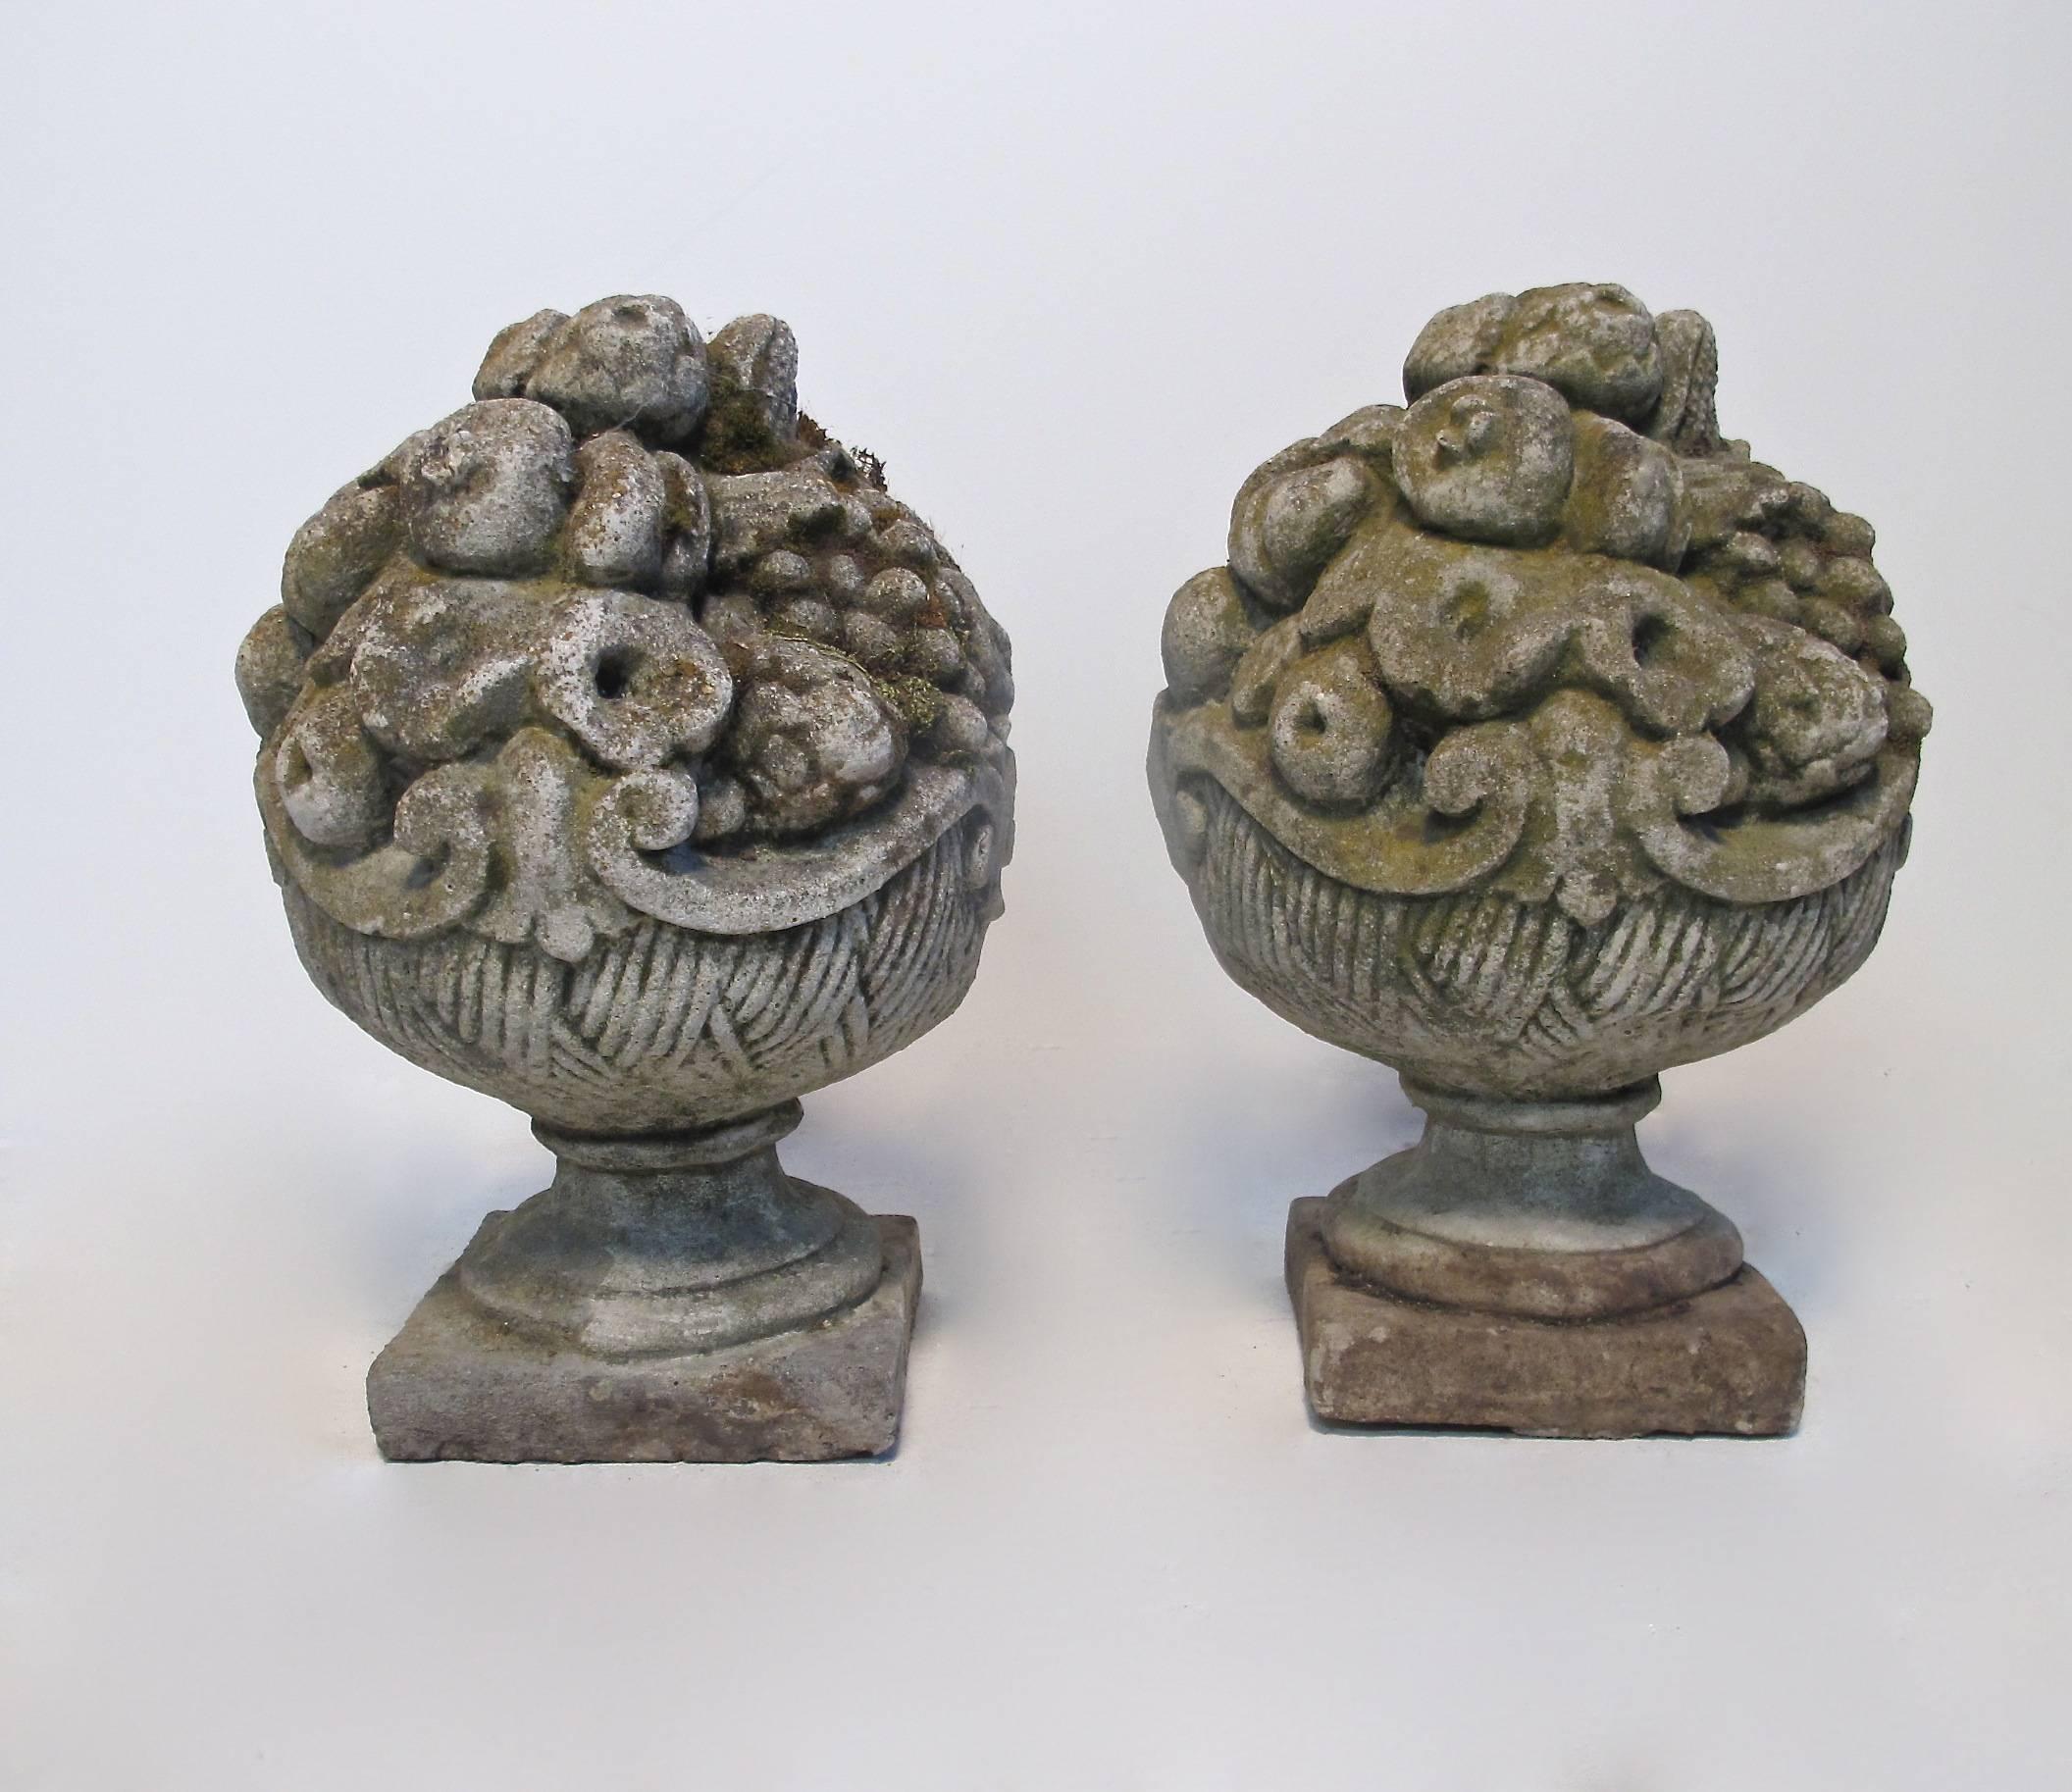 Wonderful Pair of overflowing fruit baskets made of Cadogan Stone in great condition with crusty weathered look.  Some minor abrasions, completely intact.
English, 19th. Century. 